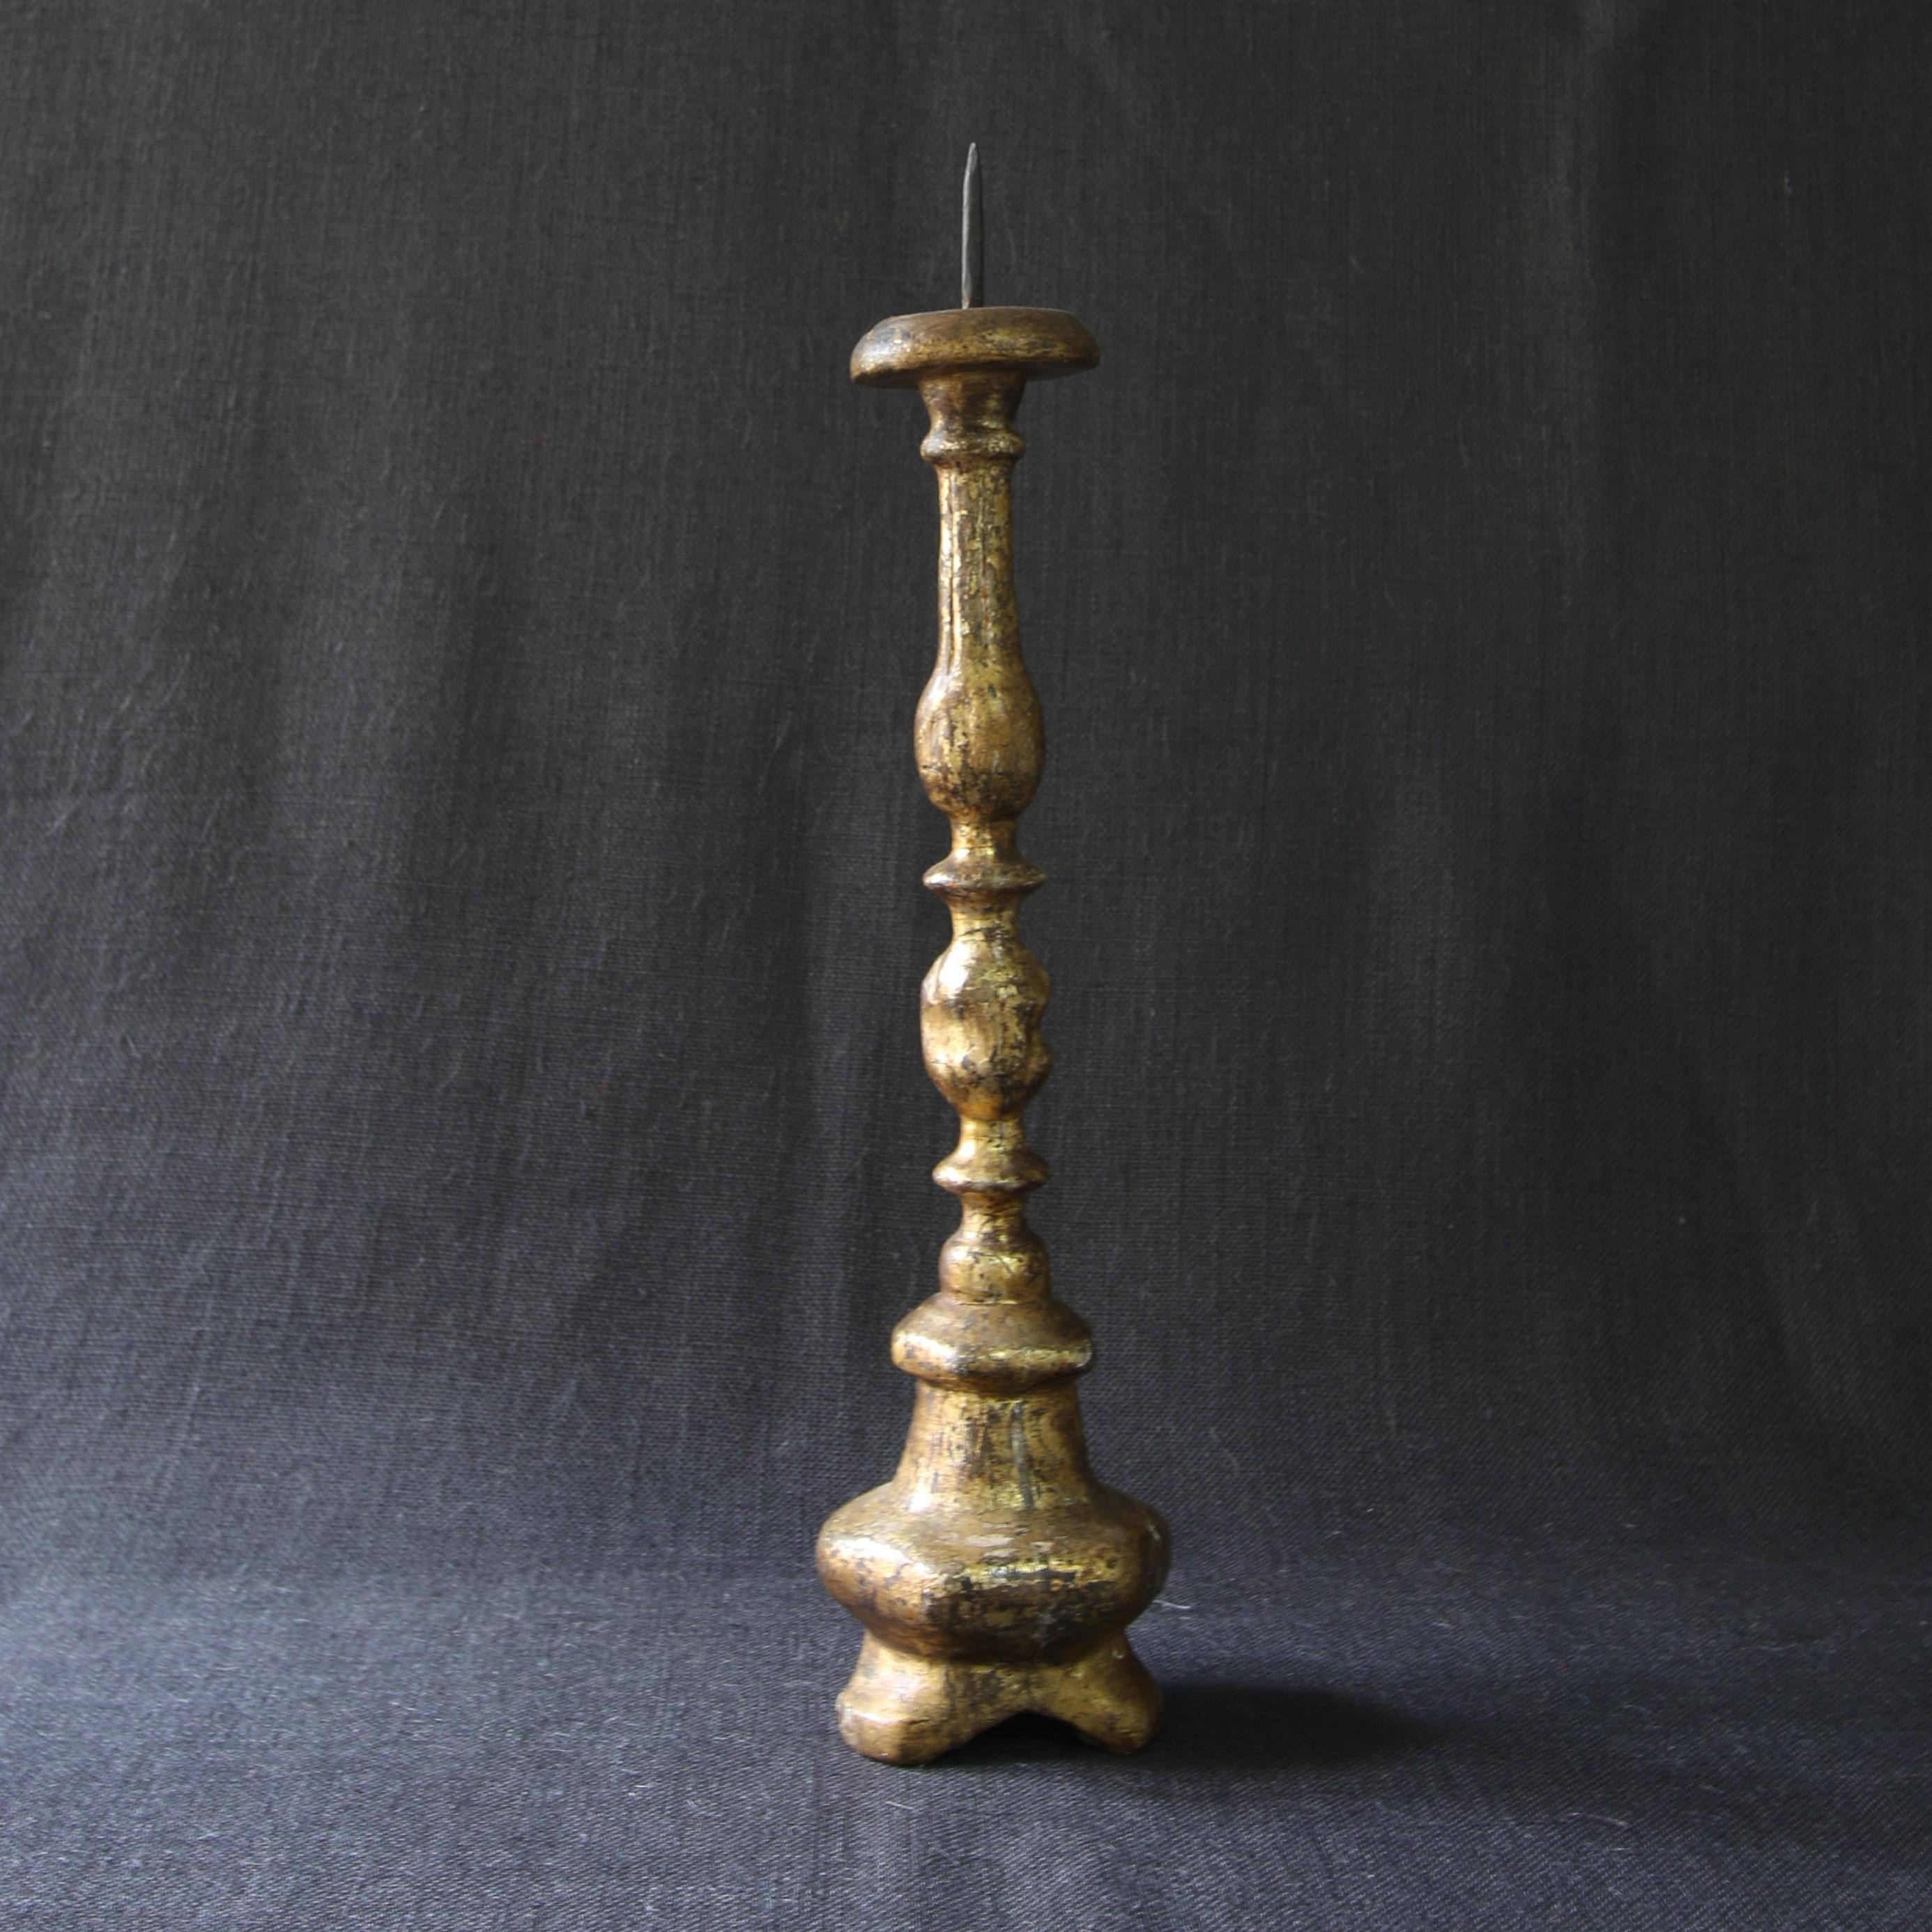 This gilded wood candle spike dates back to the 18th century. It's original patina gives to it a special charm. The irregularities of its shape testify to its antiquity.